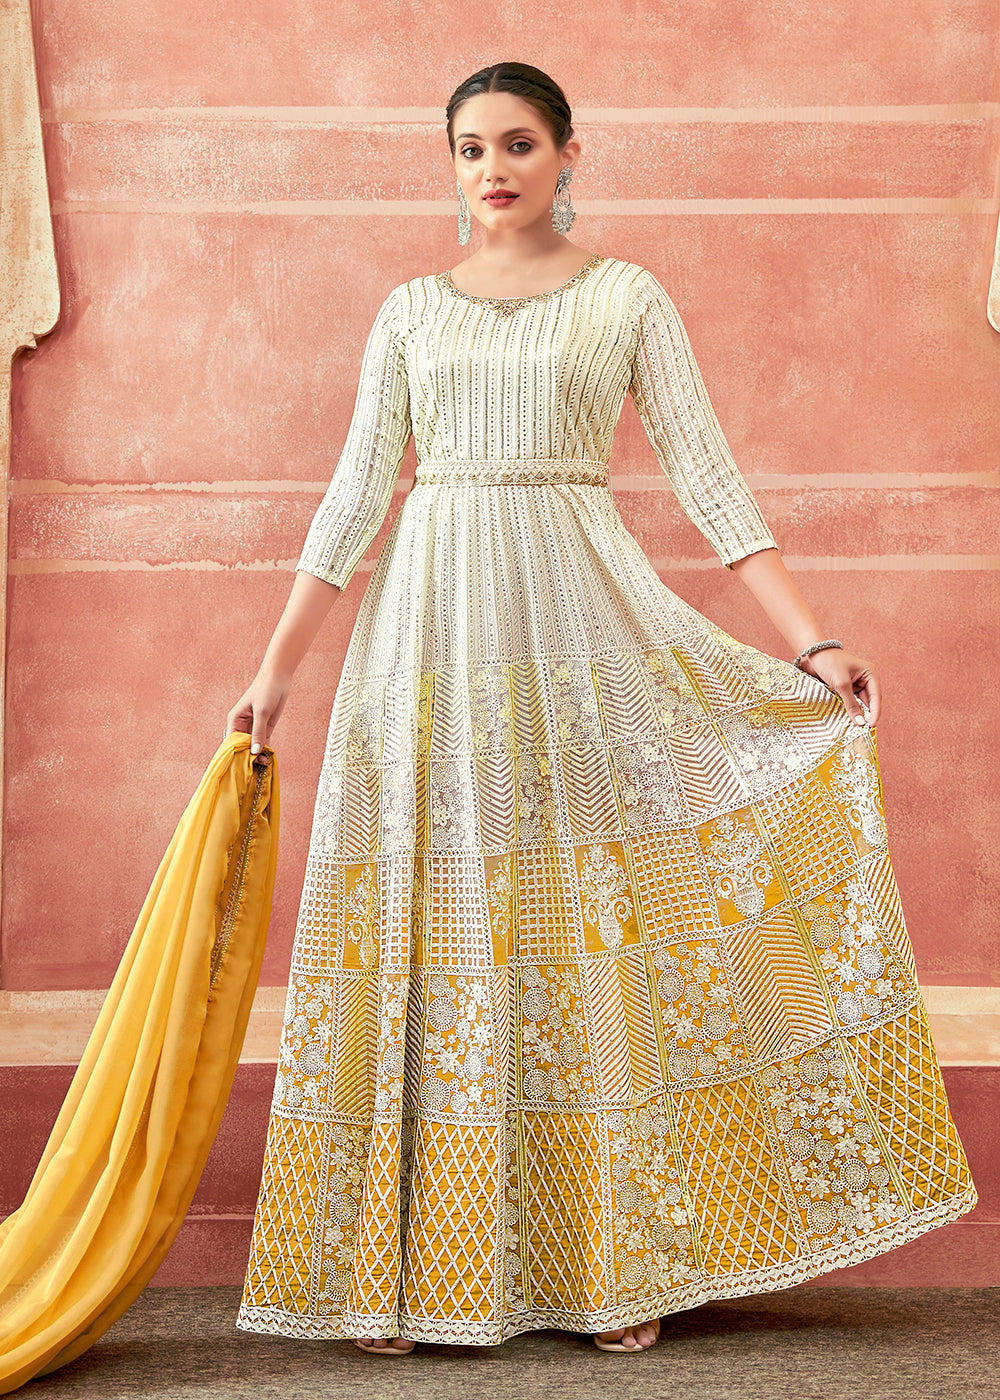 Buy Now Off White & Yellow Georgette Embroidered Festive Anarkali Suit Online in USA, UK, Australia, New Zealand, Canada & Worldwide at Empress Clothing. 